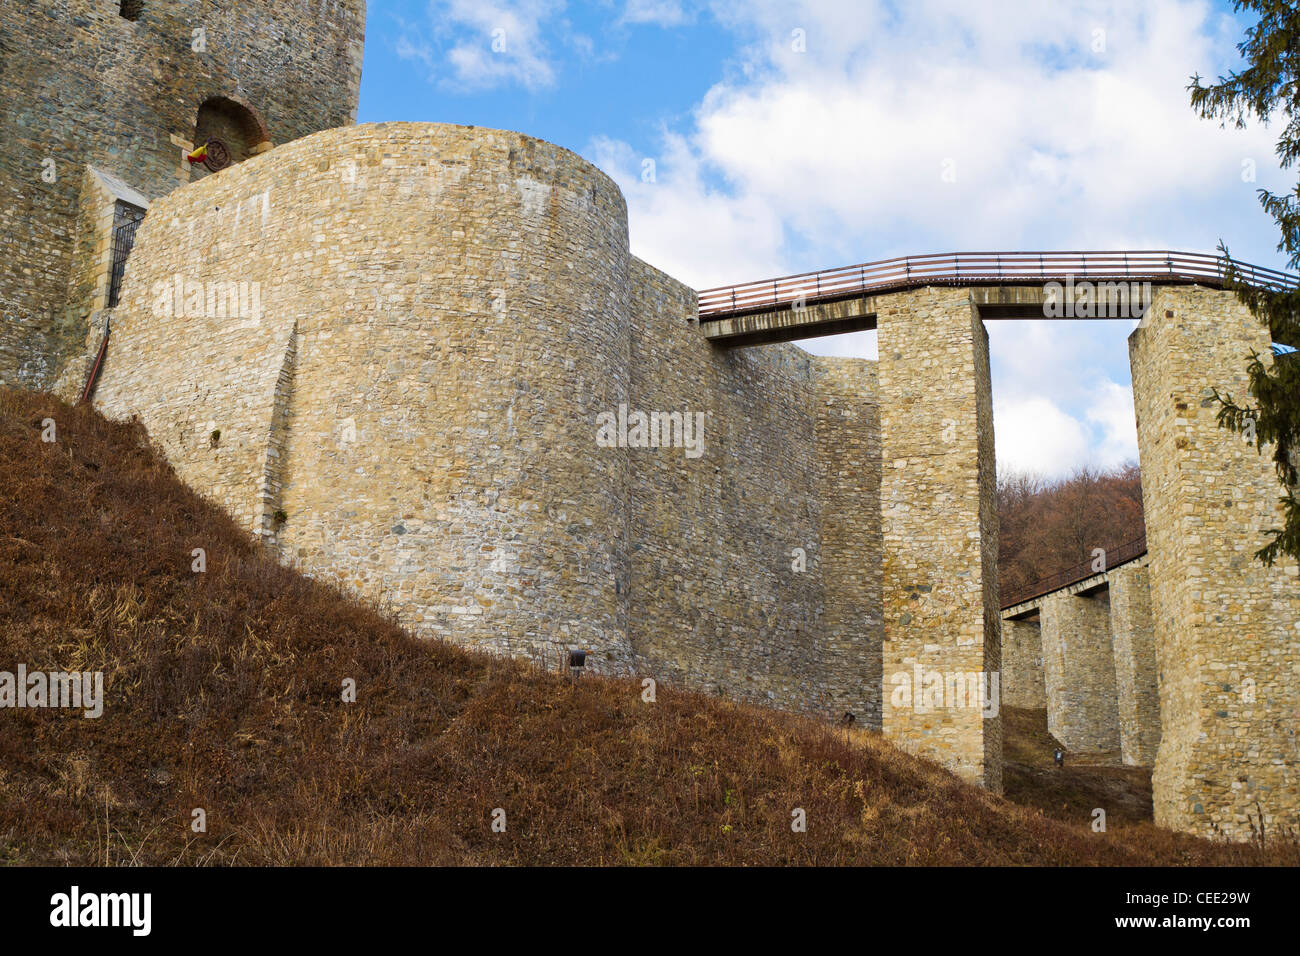 Ruins of an old castle in Eastern Europe Stock Photo